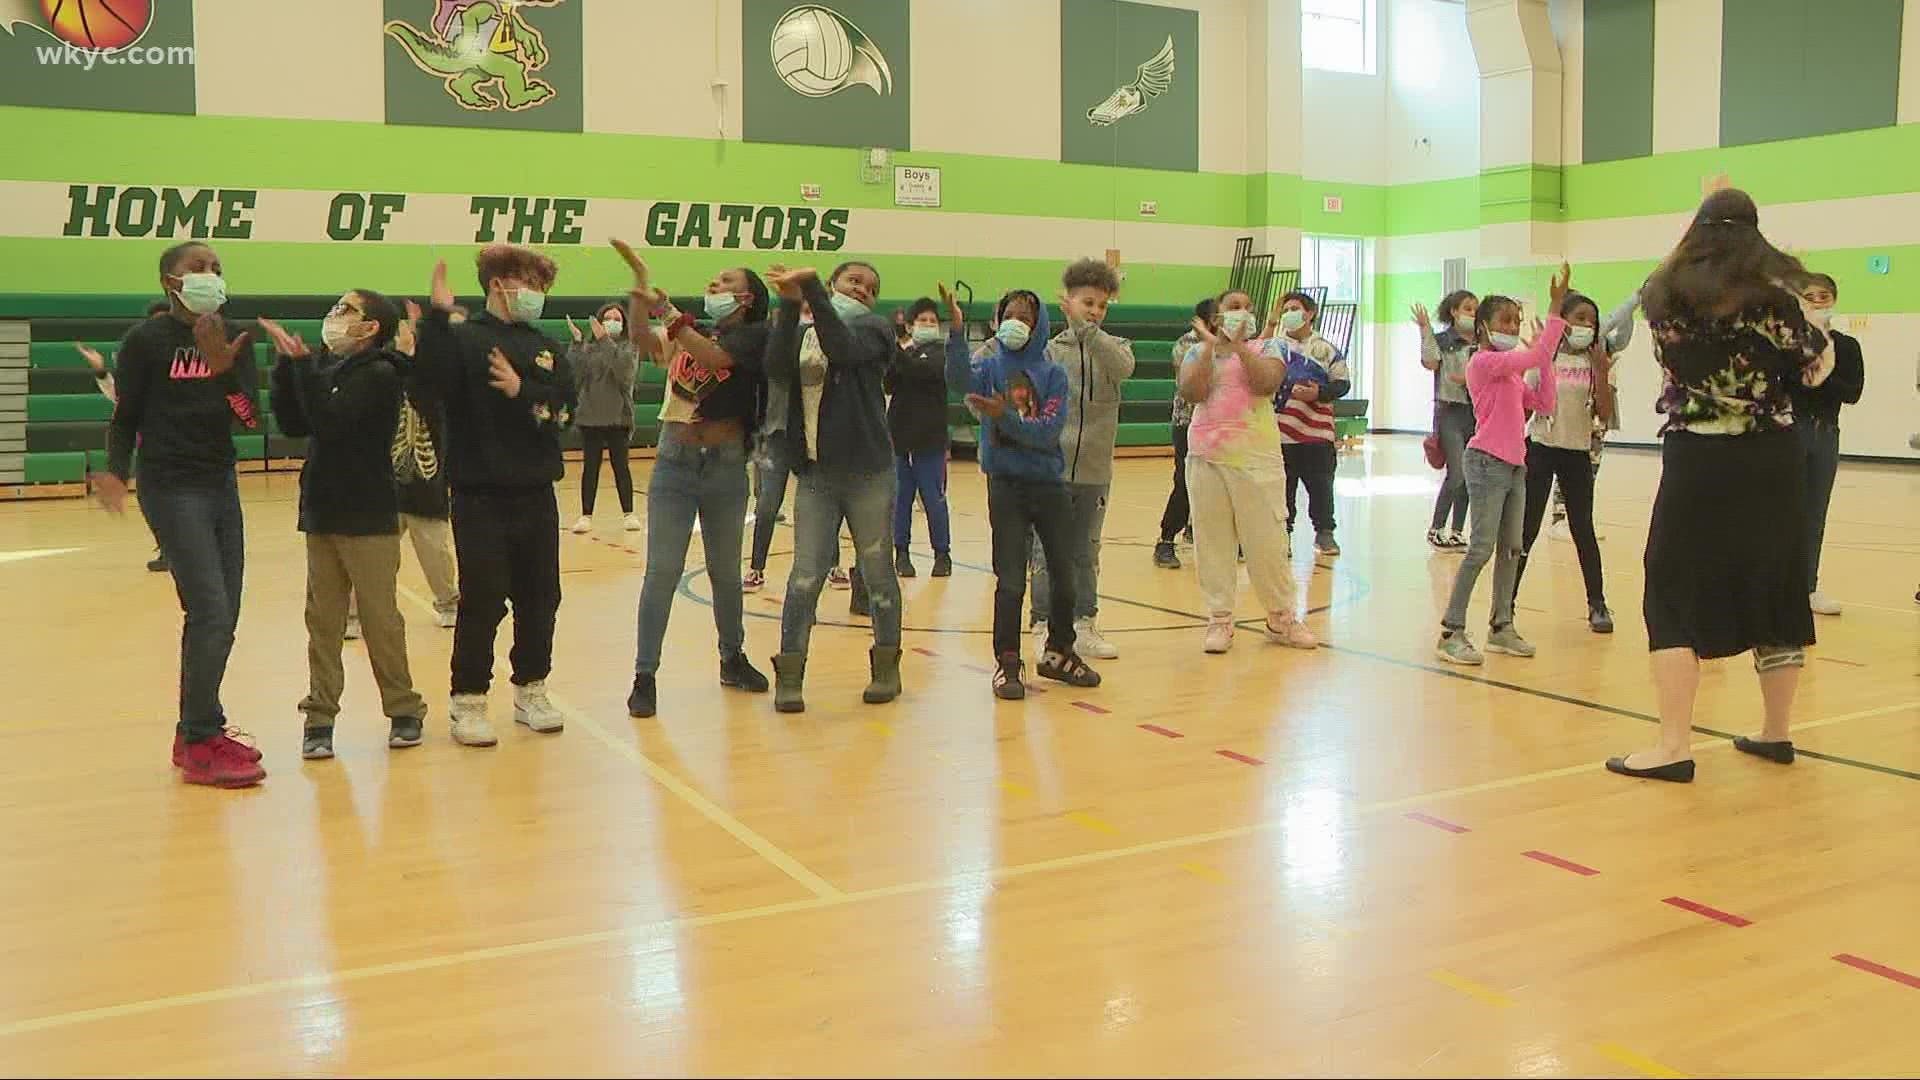 3News’ Maureen Kyle had the opportunity to visit with Dancing Classrooms Northeast Ohio to see how they’re changing the middle school experience.